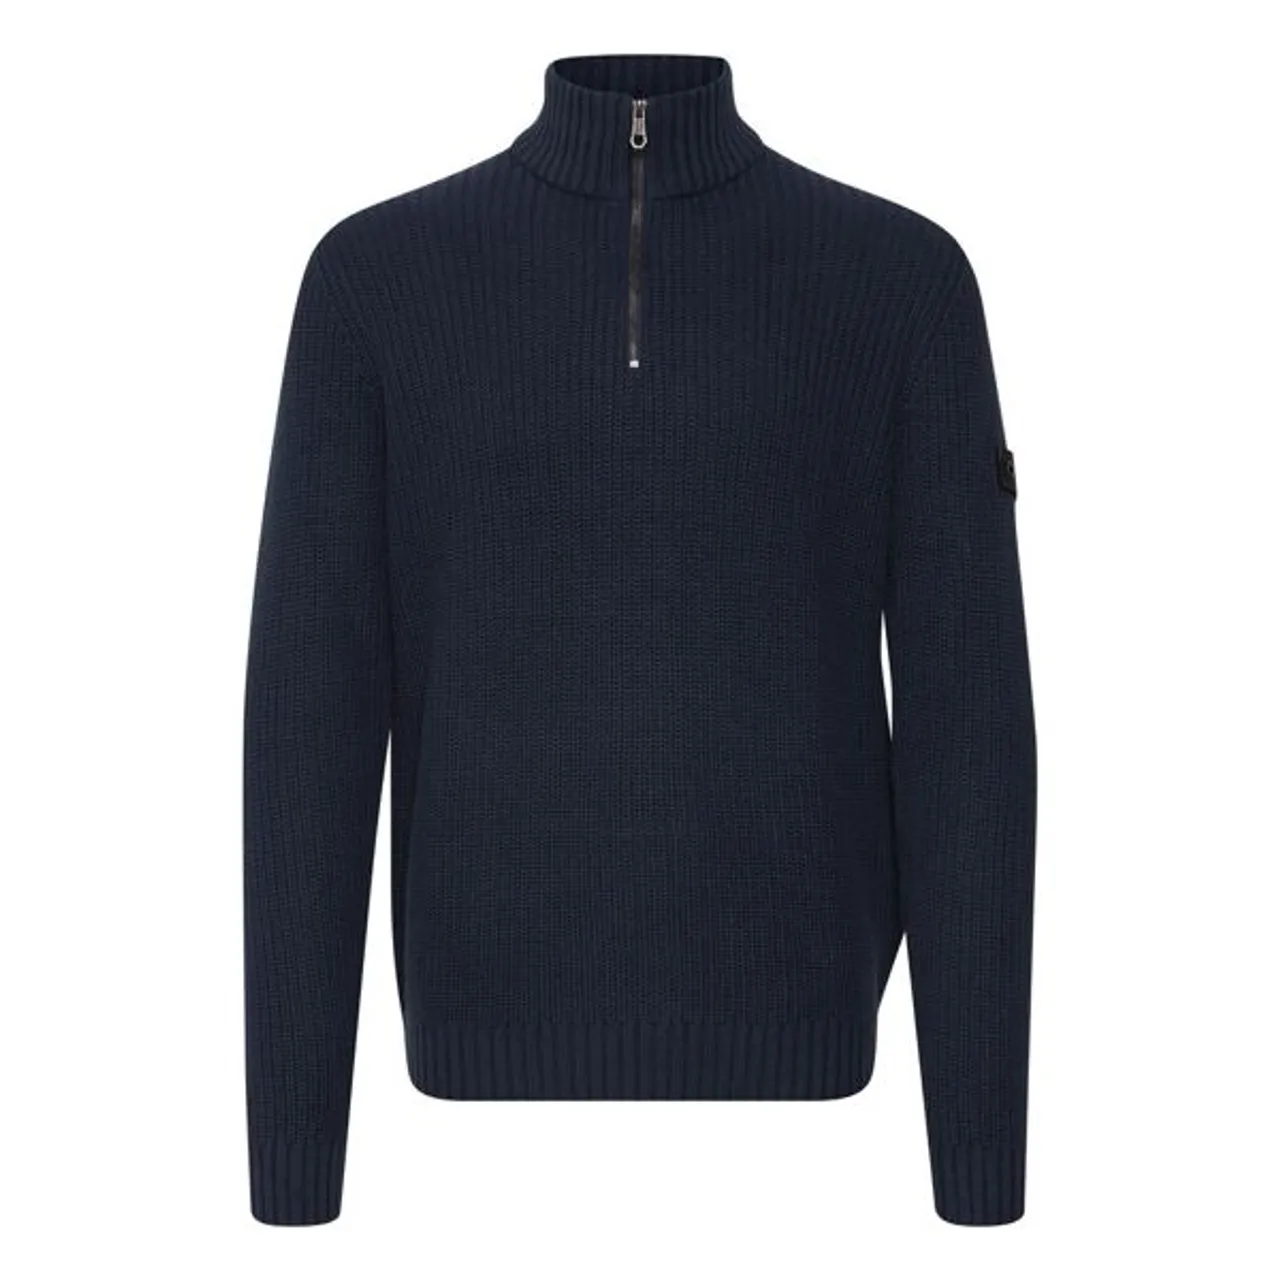 Troyer 11 PROJECT "11 Project PRXANTHOS" Gr. M, blau (insignia blue) Herren Pullover Troyer